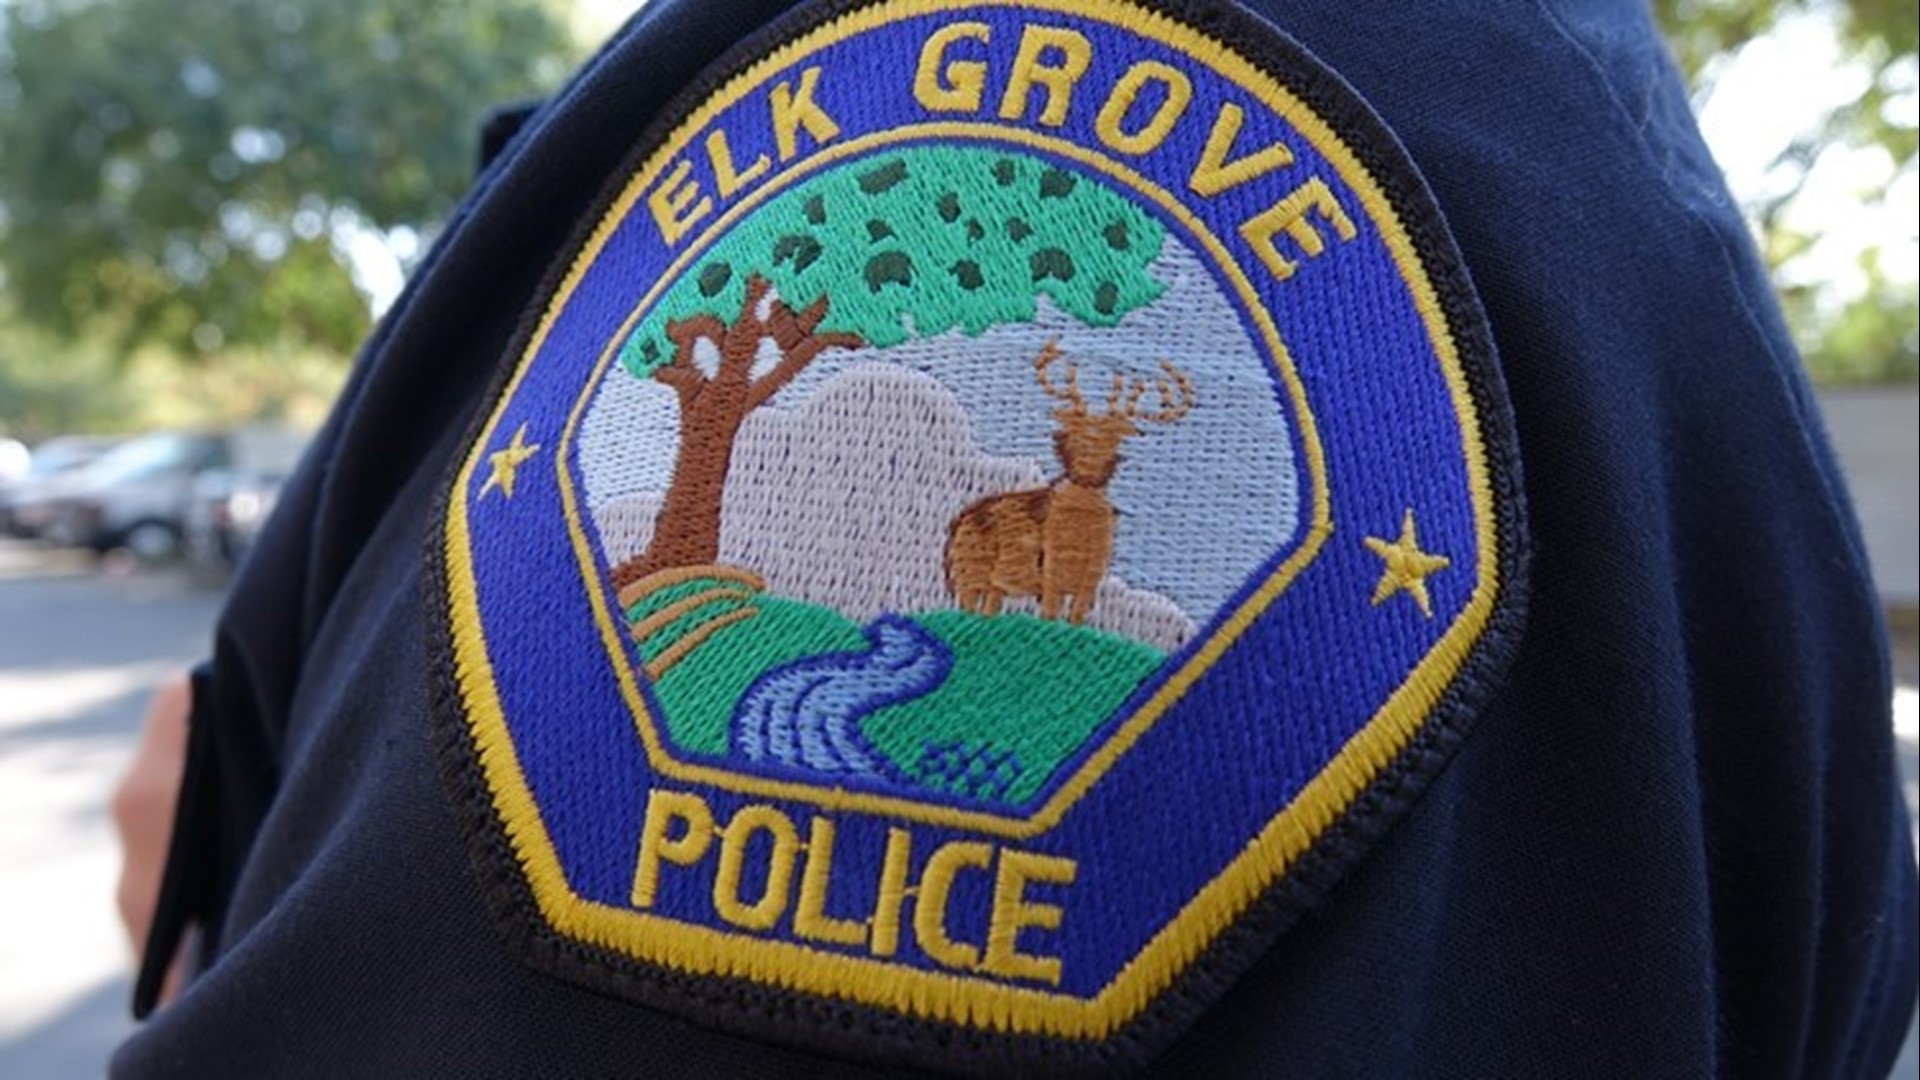 Nine years after two Sikh men were shot down in broad daylight during their morning walk, Elk Grove Police are asking for help from the public to solve the case.